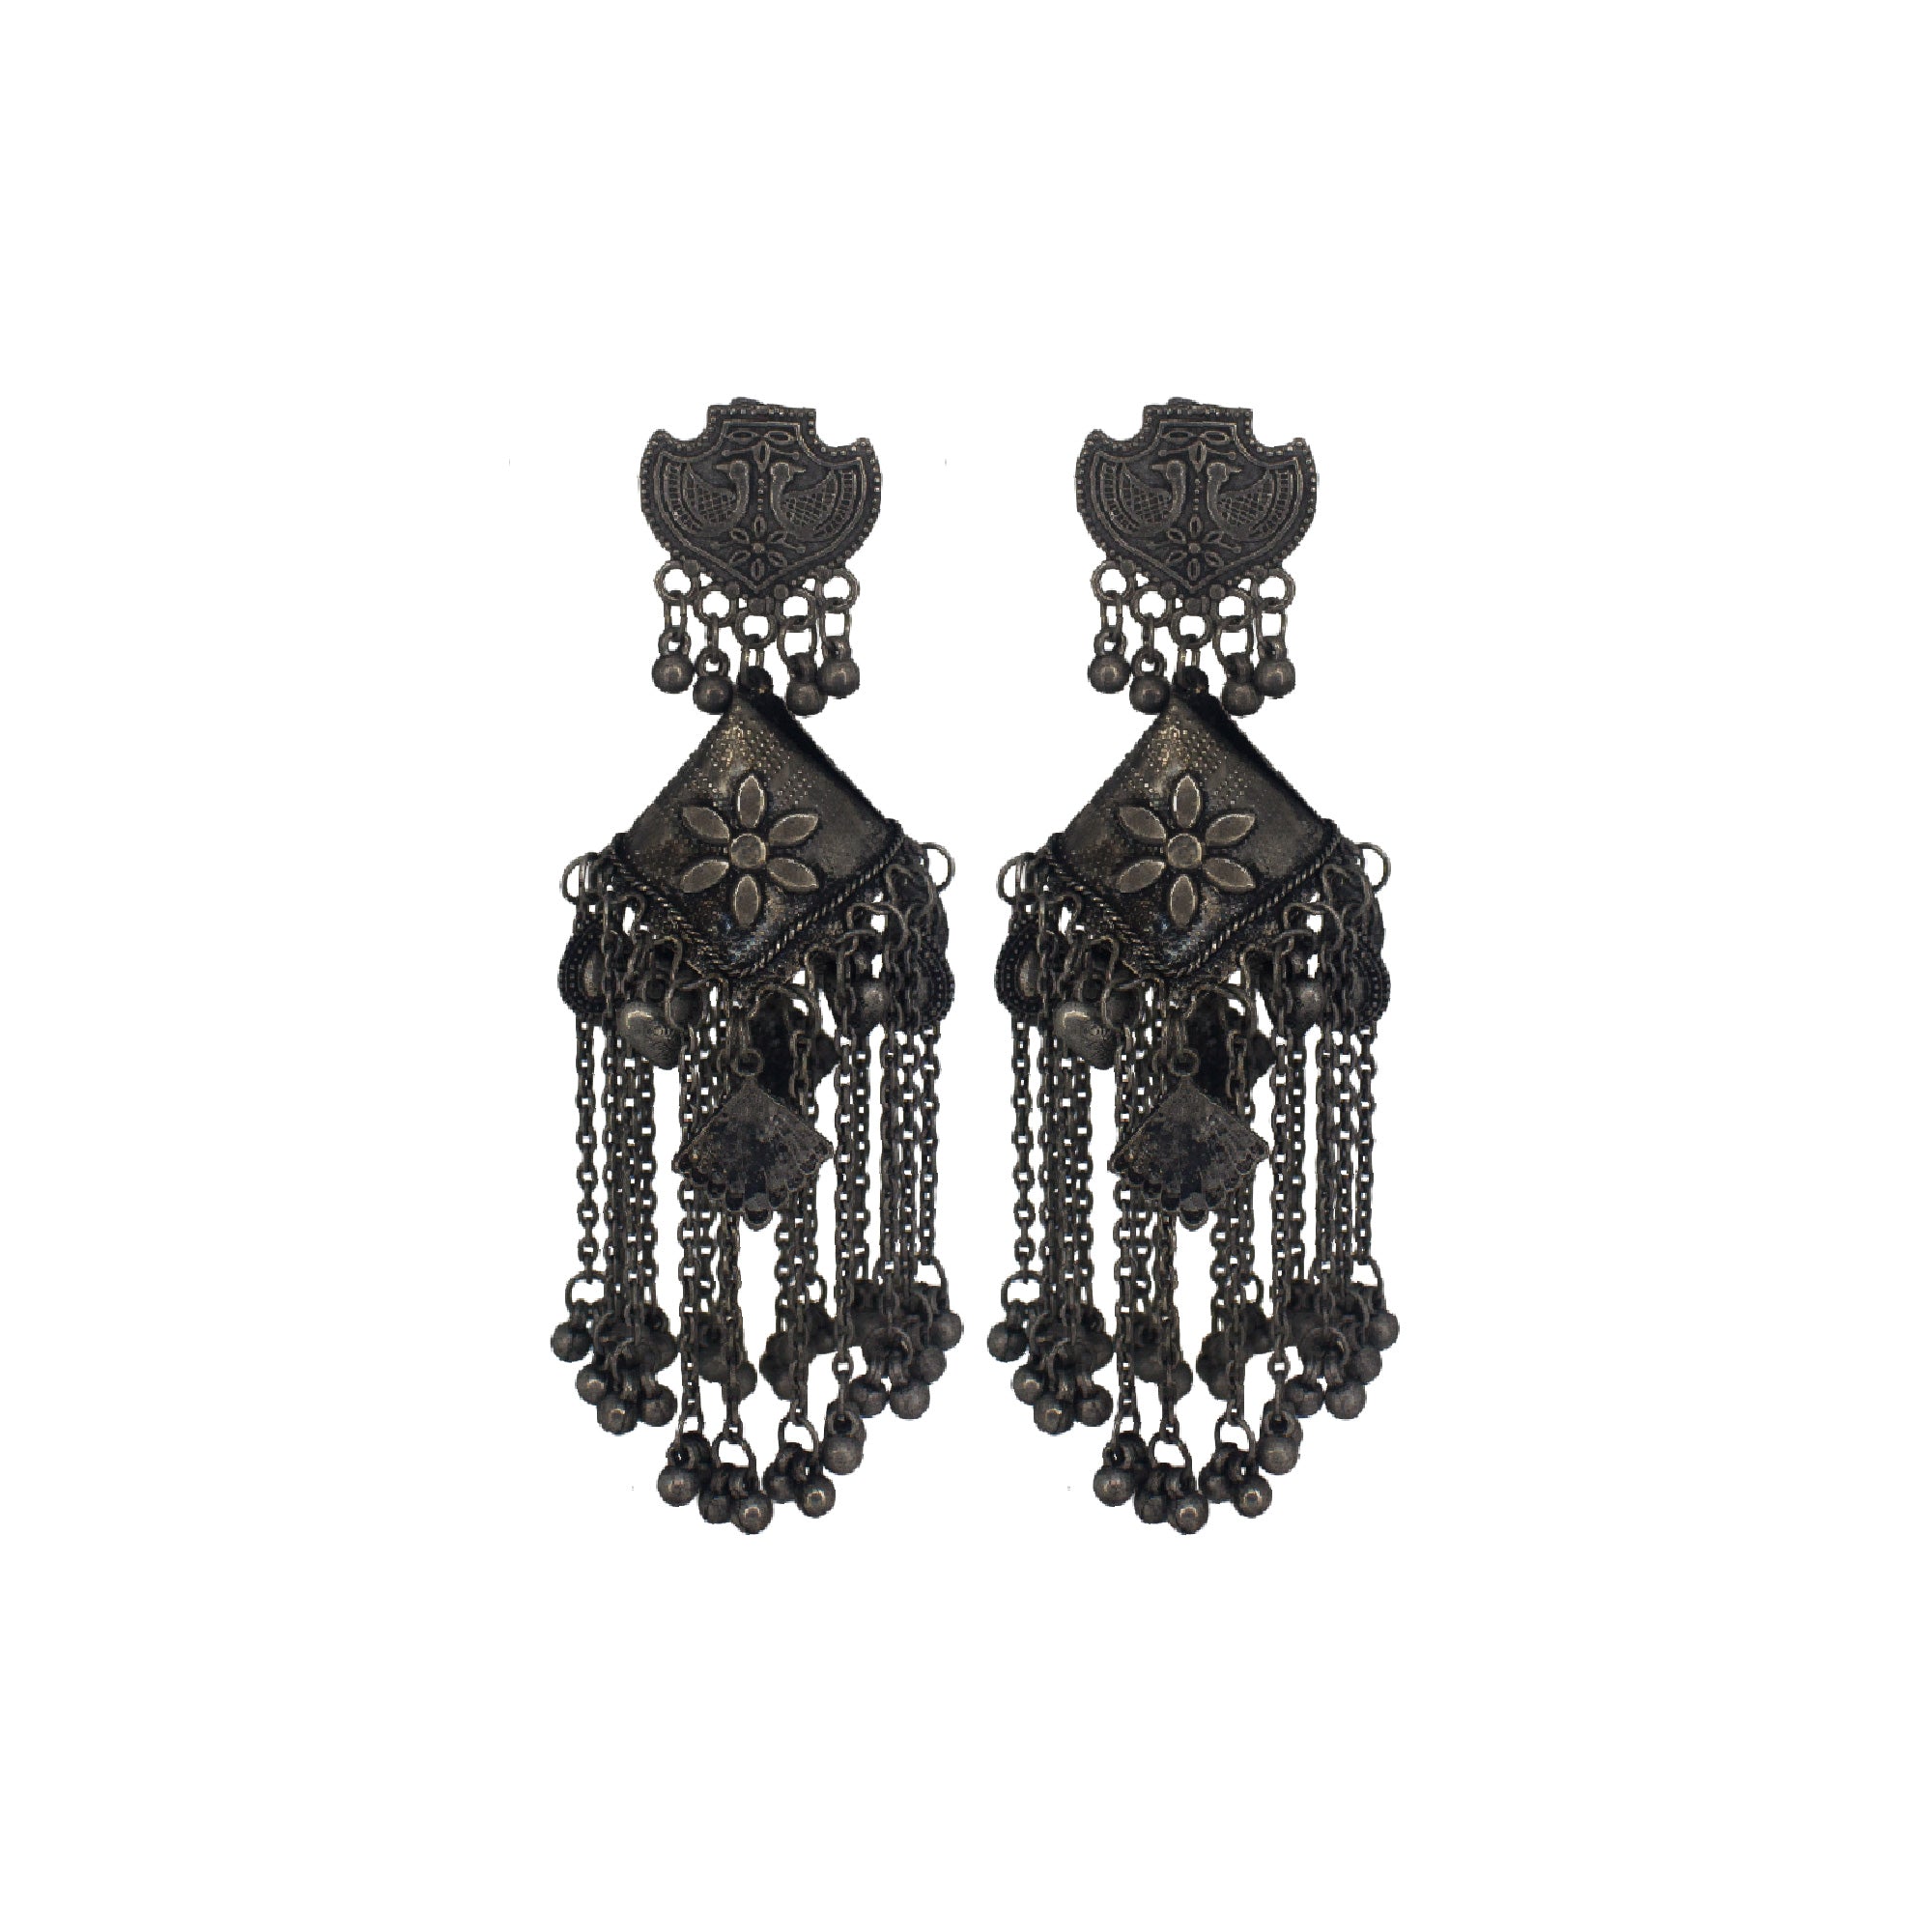 Abhinn Black Polished Floral Design With Hanging Beads Jhumka Earrings For Women